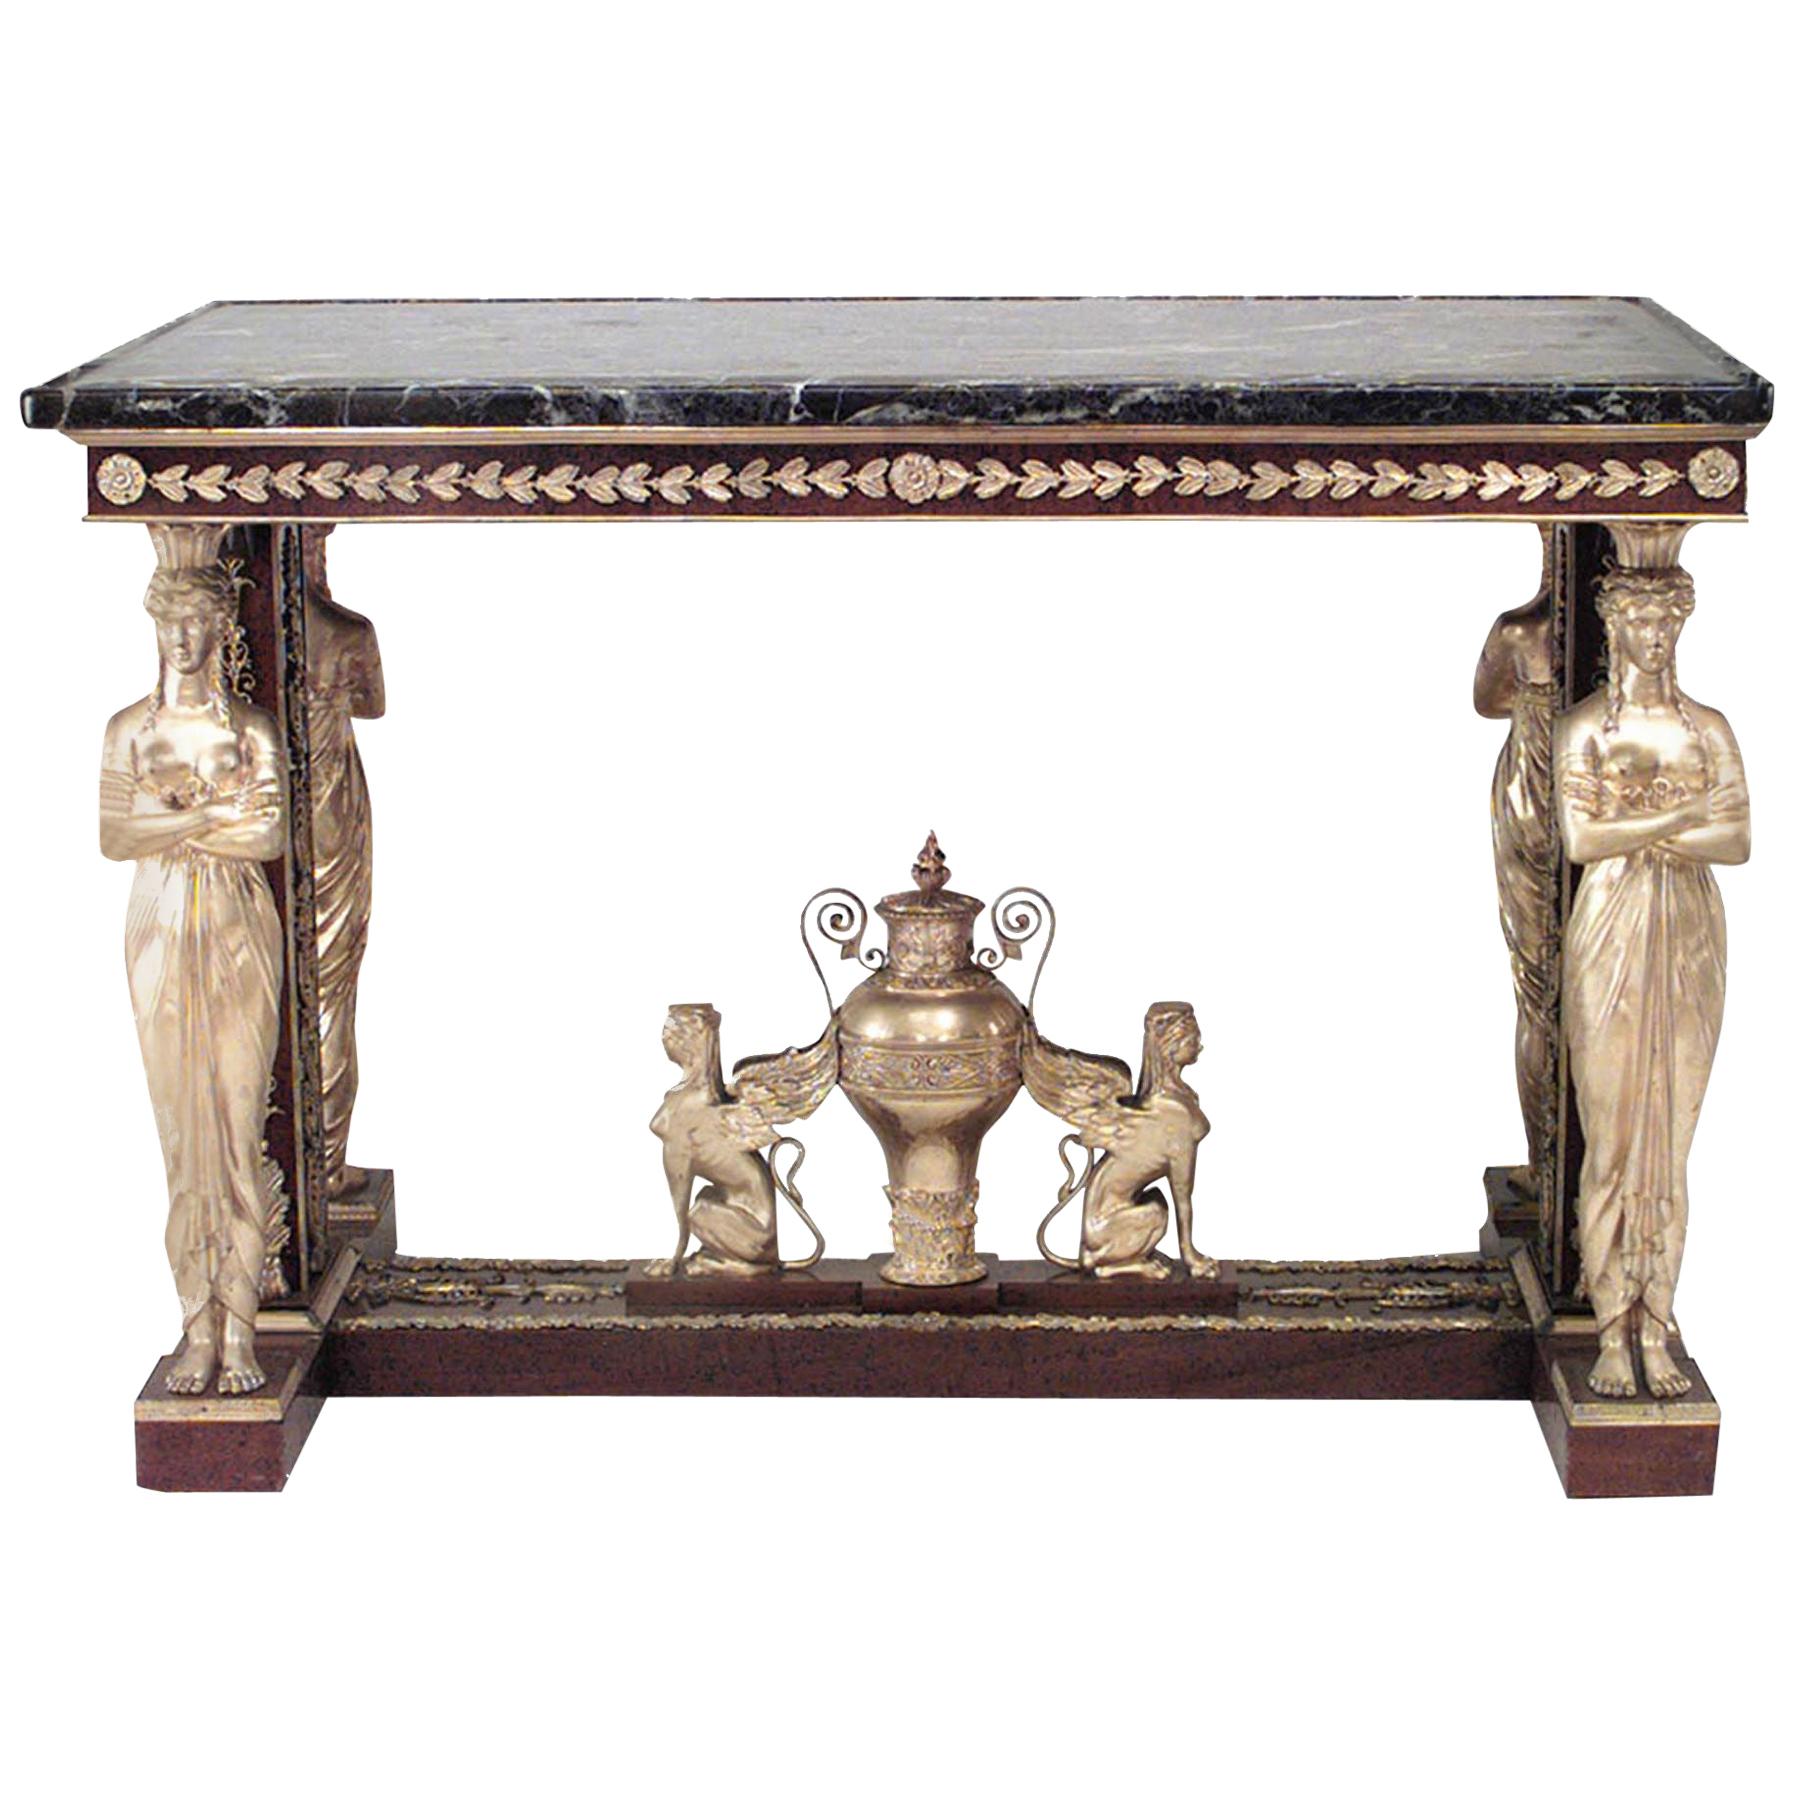 French Empire Revival Mahogany Center Table After Jacob-Desmalter For Sale